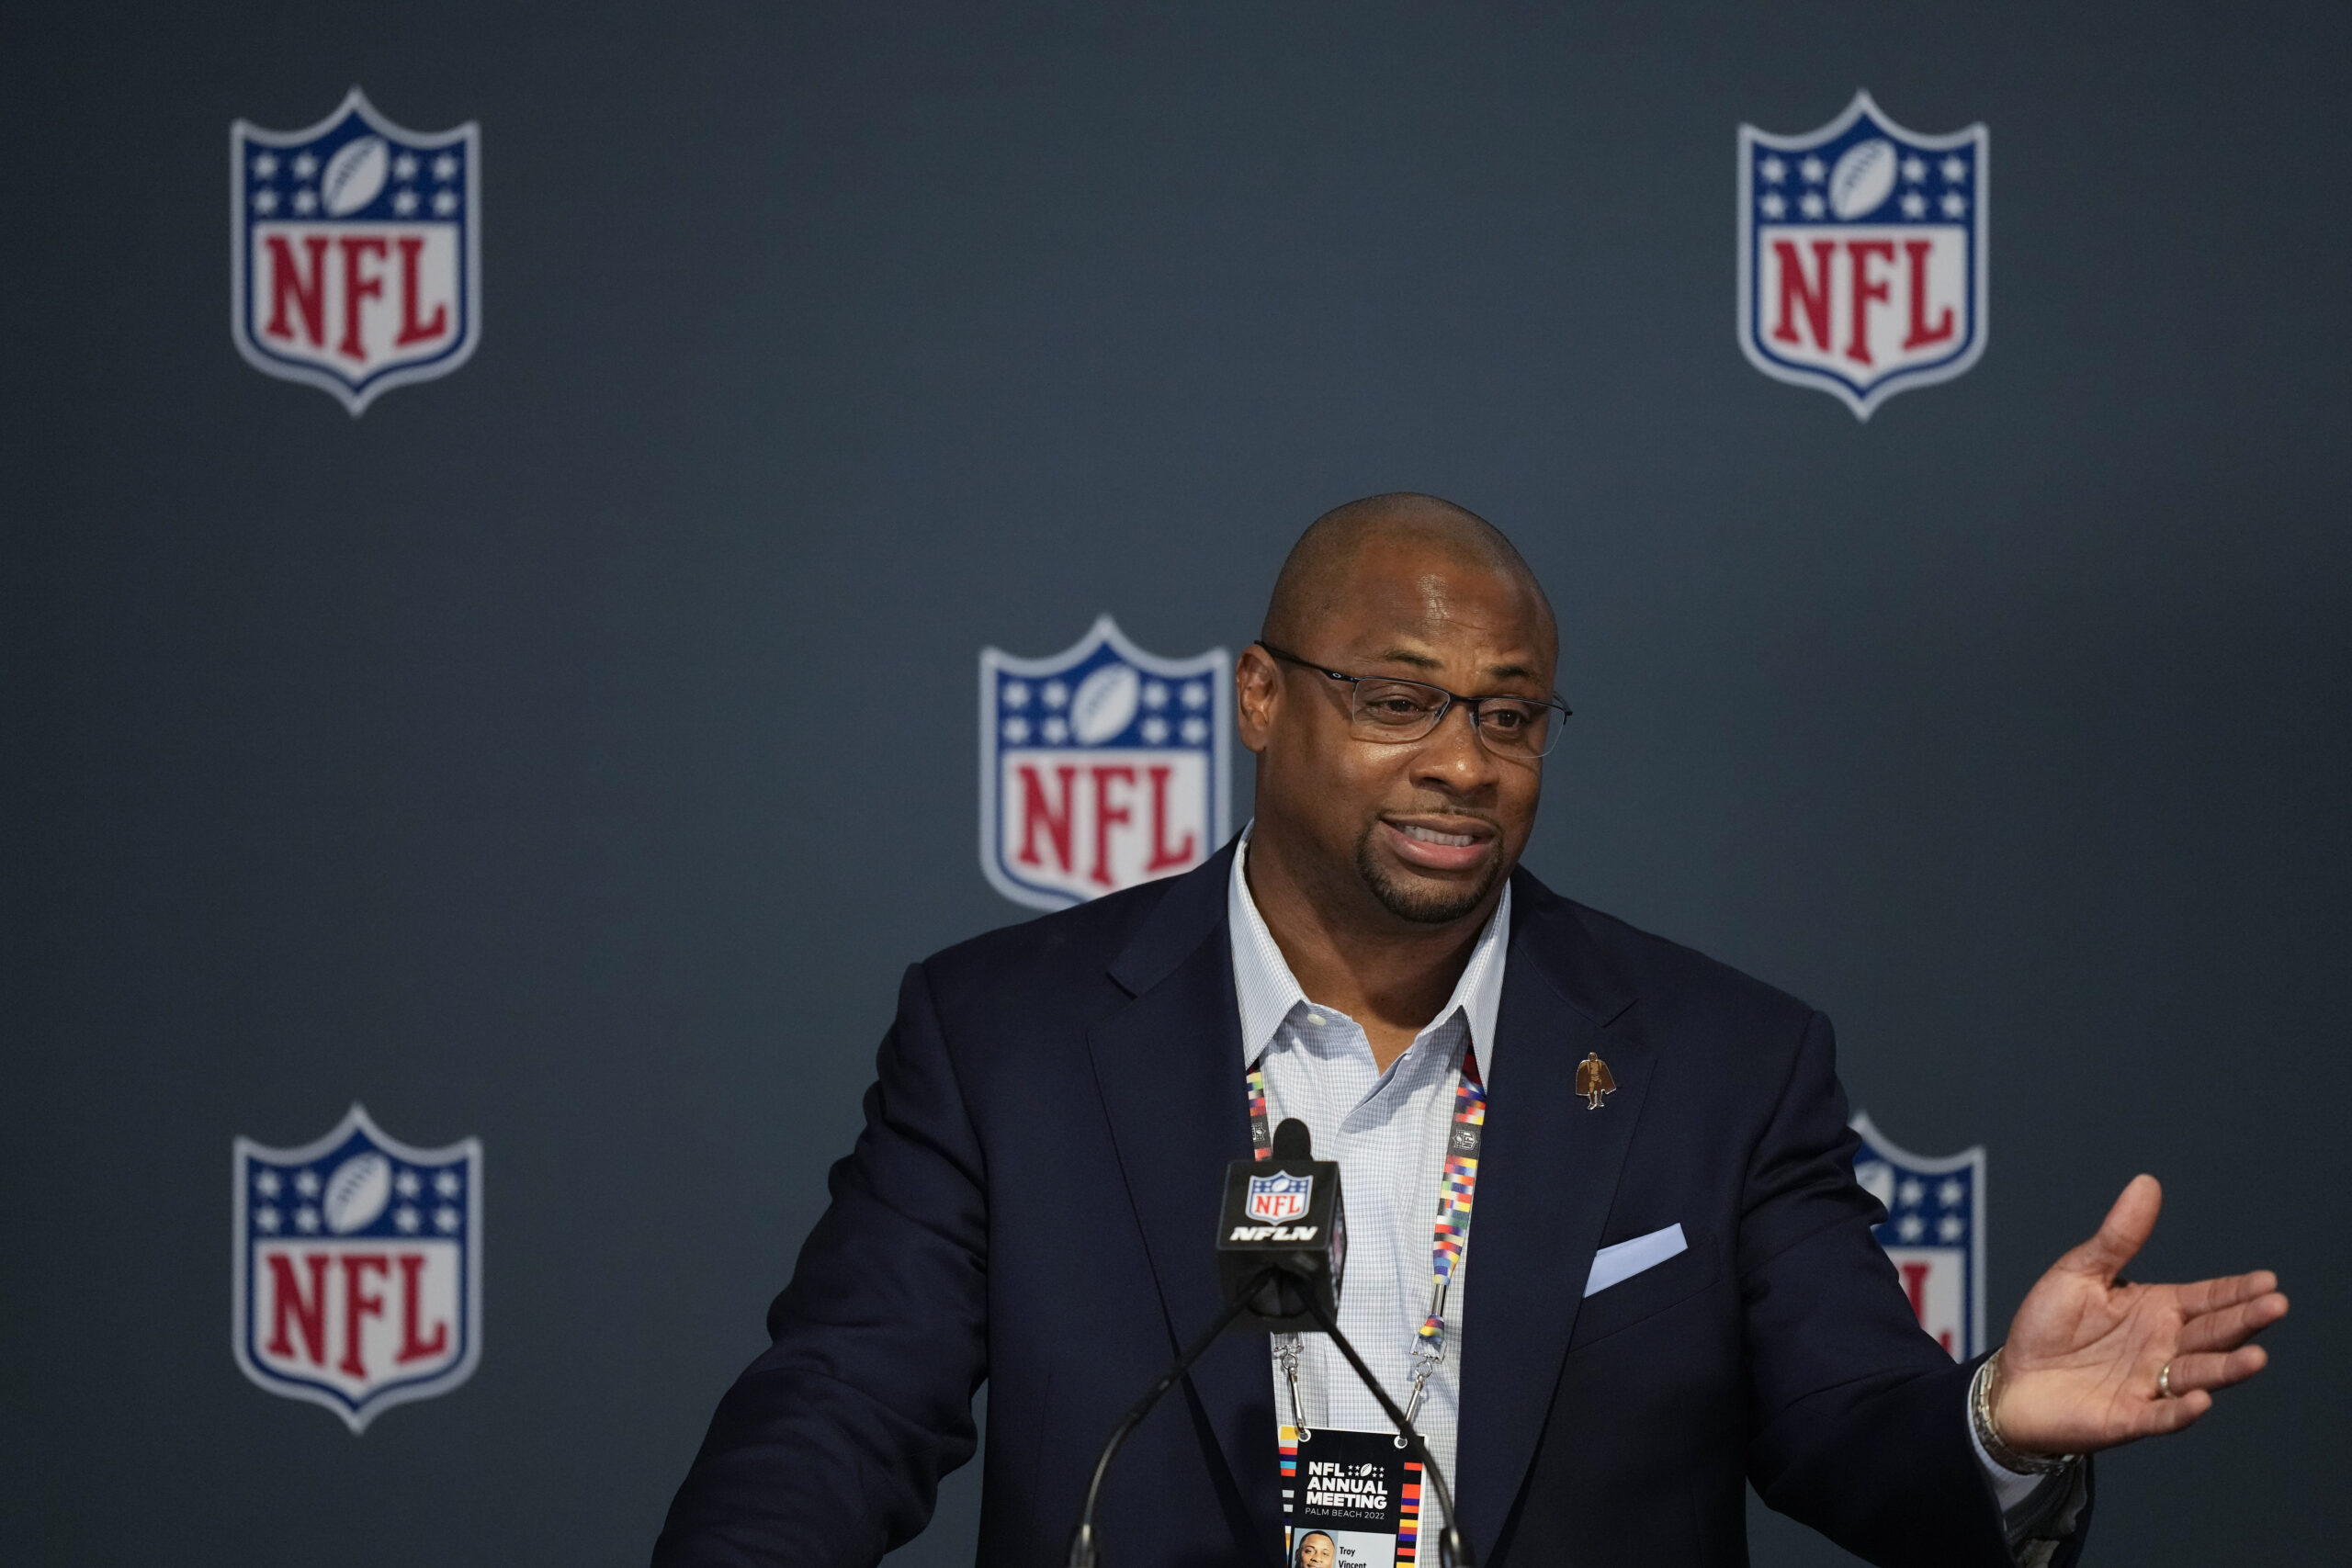 Troy Vincent, the NFL's executive vice president of football operations, speaks to journalists as the NFL announces changes to the overtime rules, during the NFL owner's meeting, Tuesday, March 29, 2022, at The Breakers resort in Palm Beach, Fla. (AP Photo/Rebecca Blackwell)